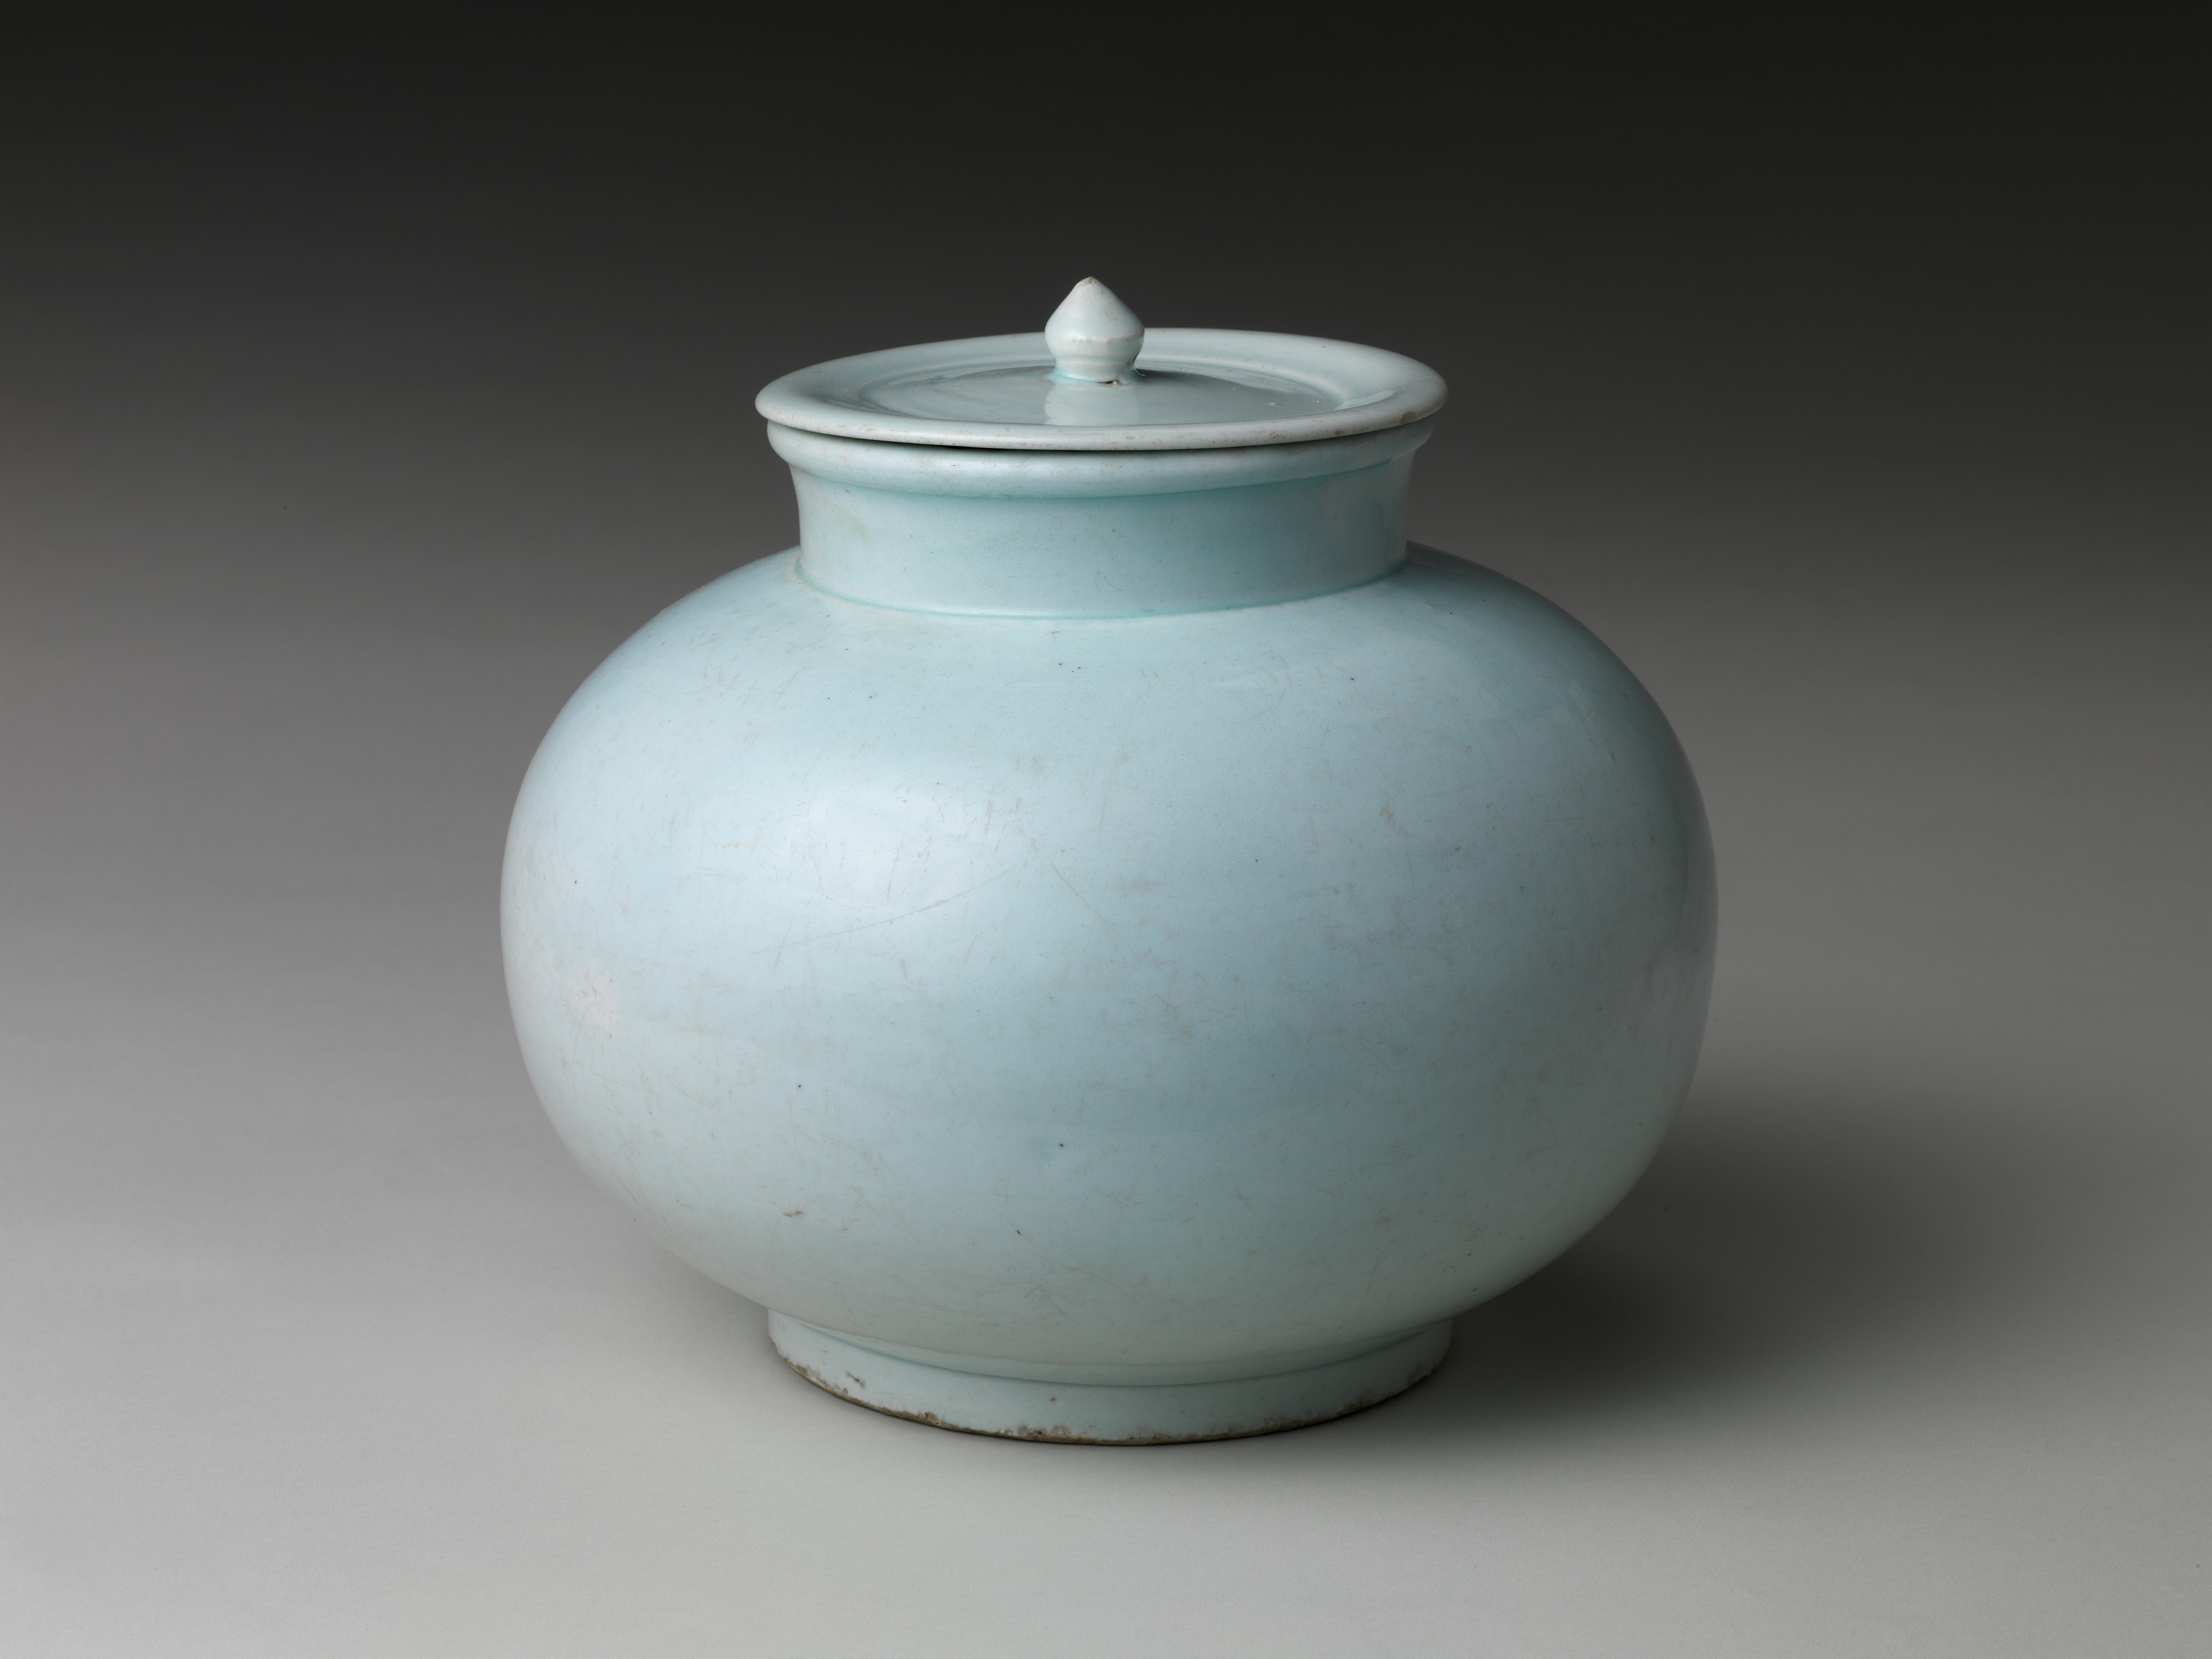 In Pursuit of White: Porcelain in the Joseon Dynasty, 1392–1910